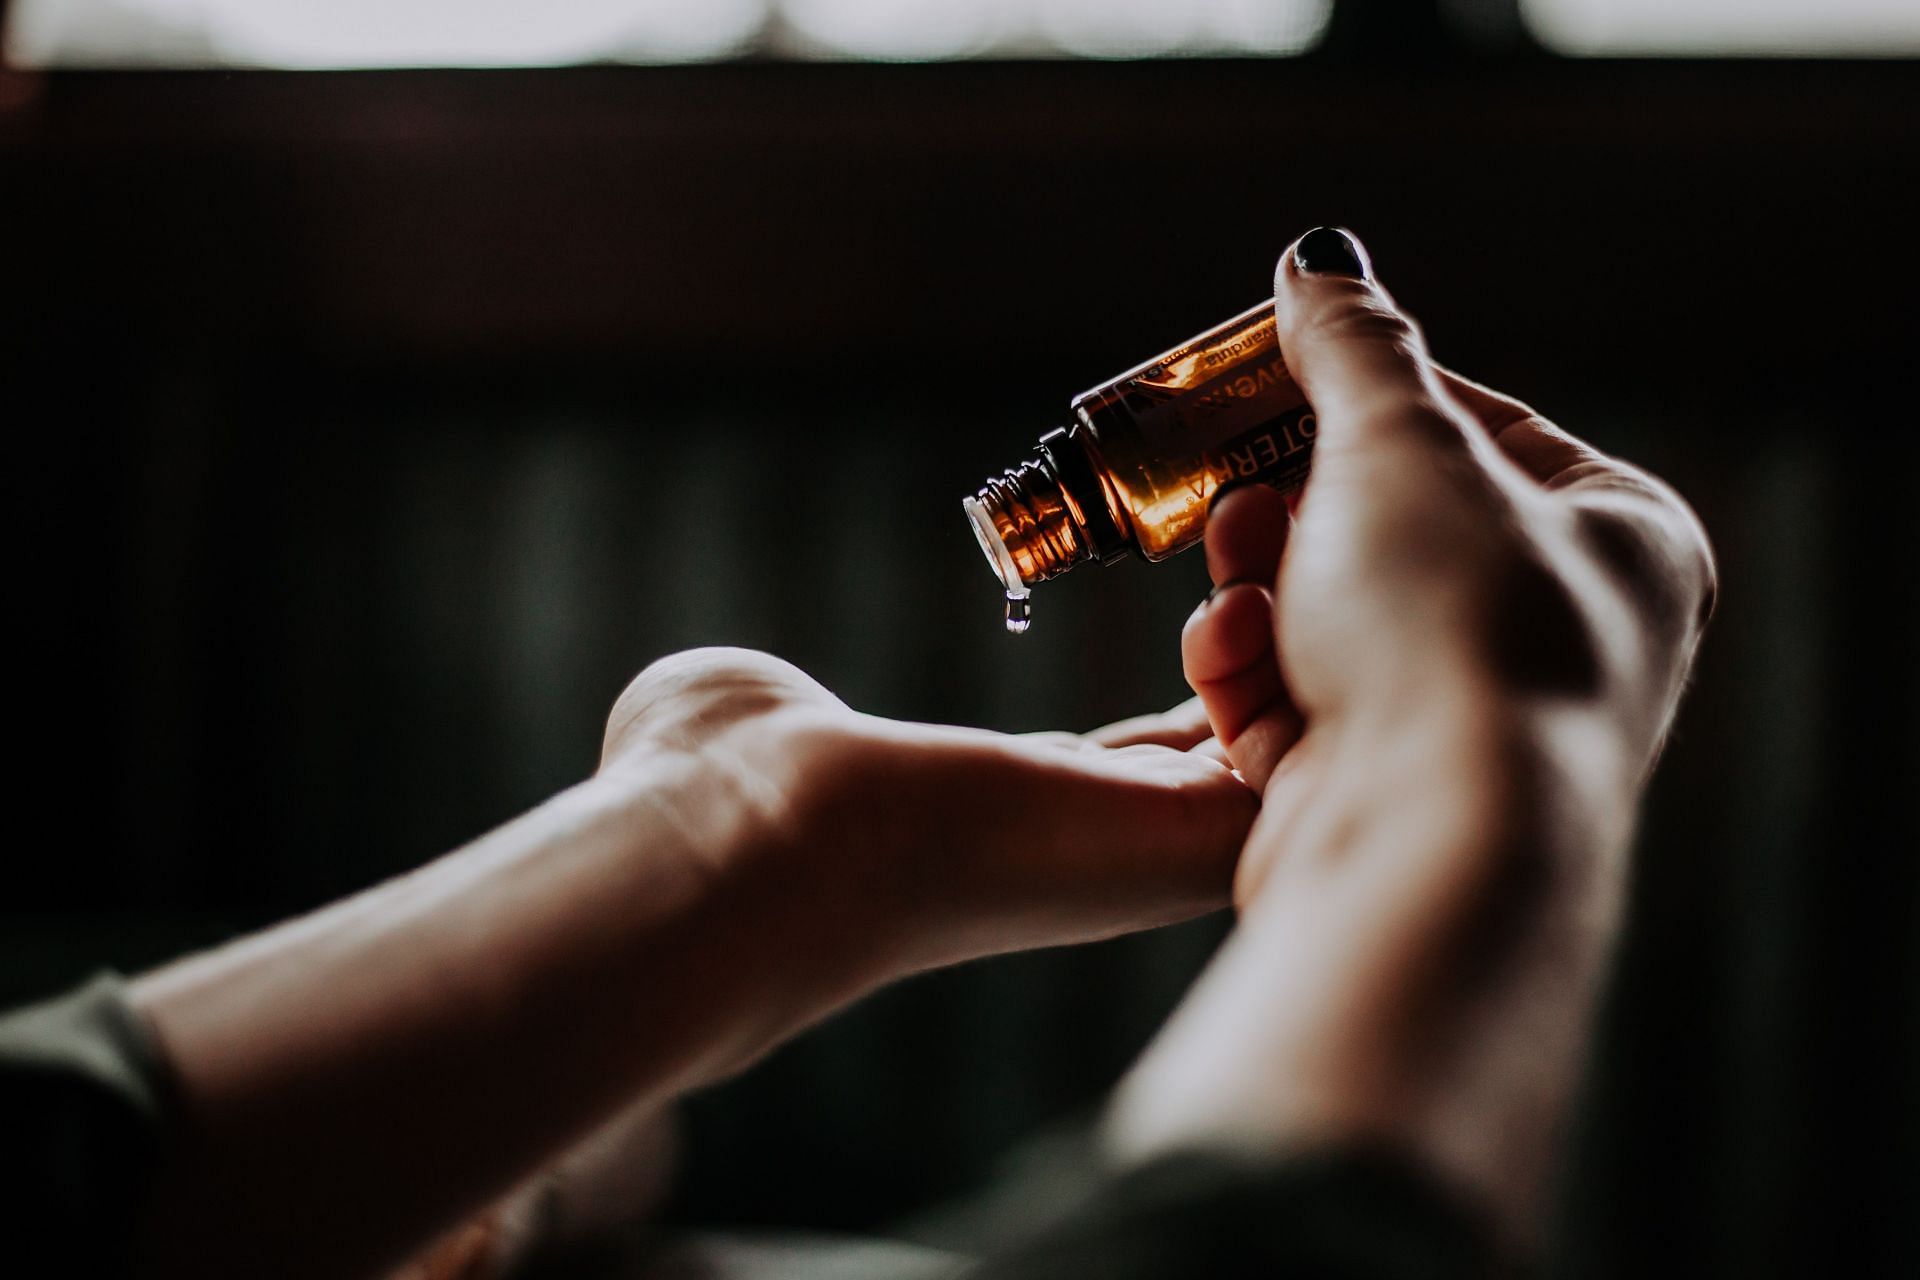 This oil is used in massages and therapy(Image by Christin Hume/Unsplash)